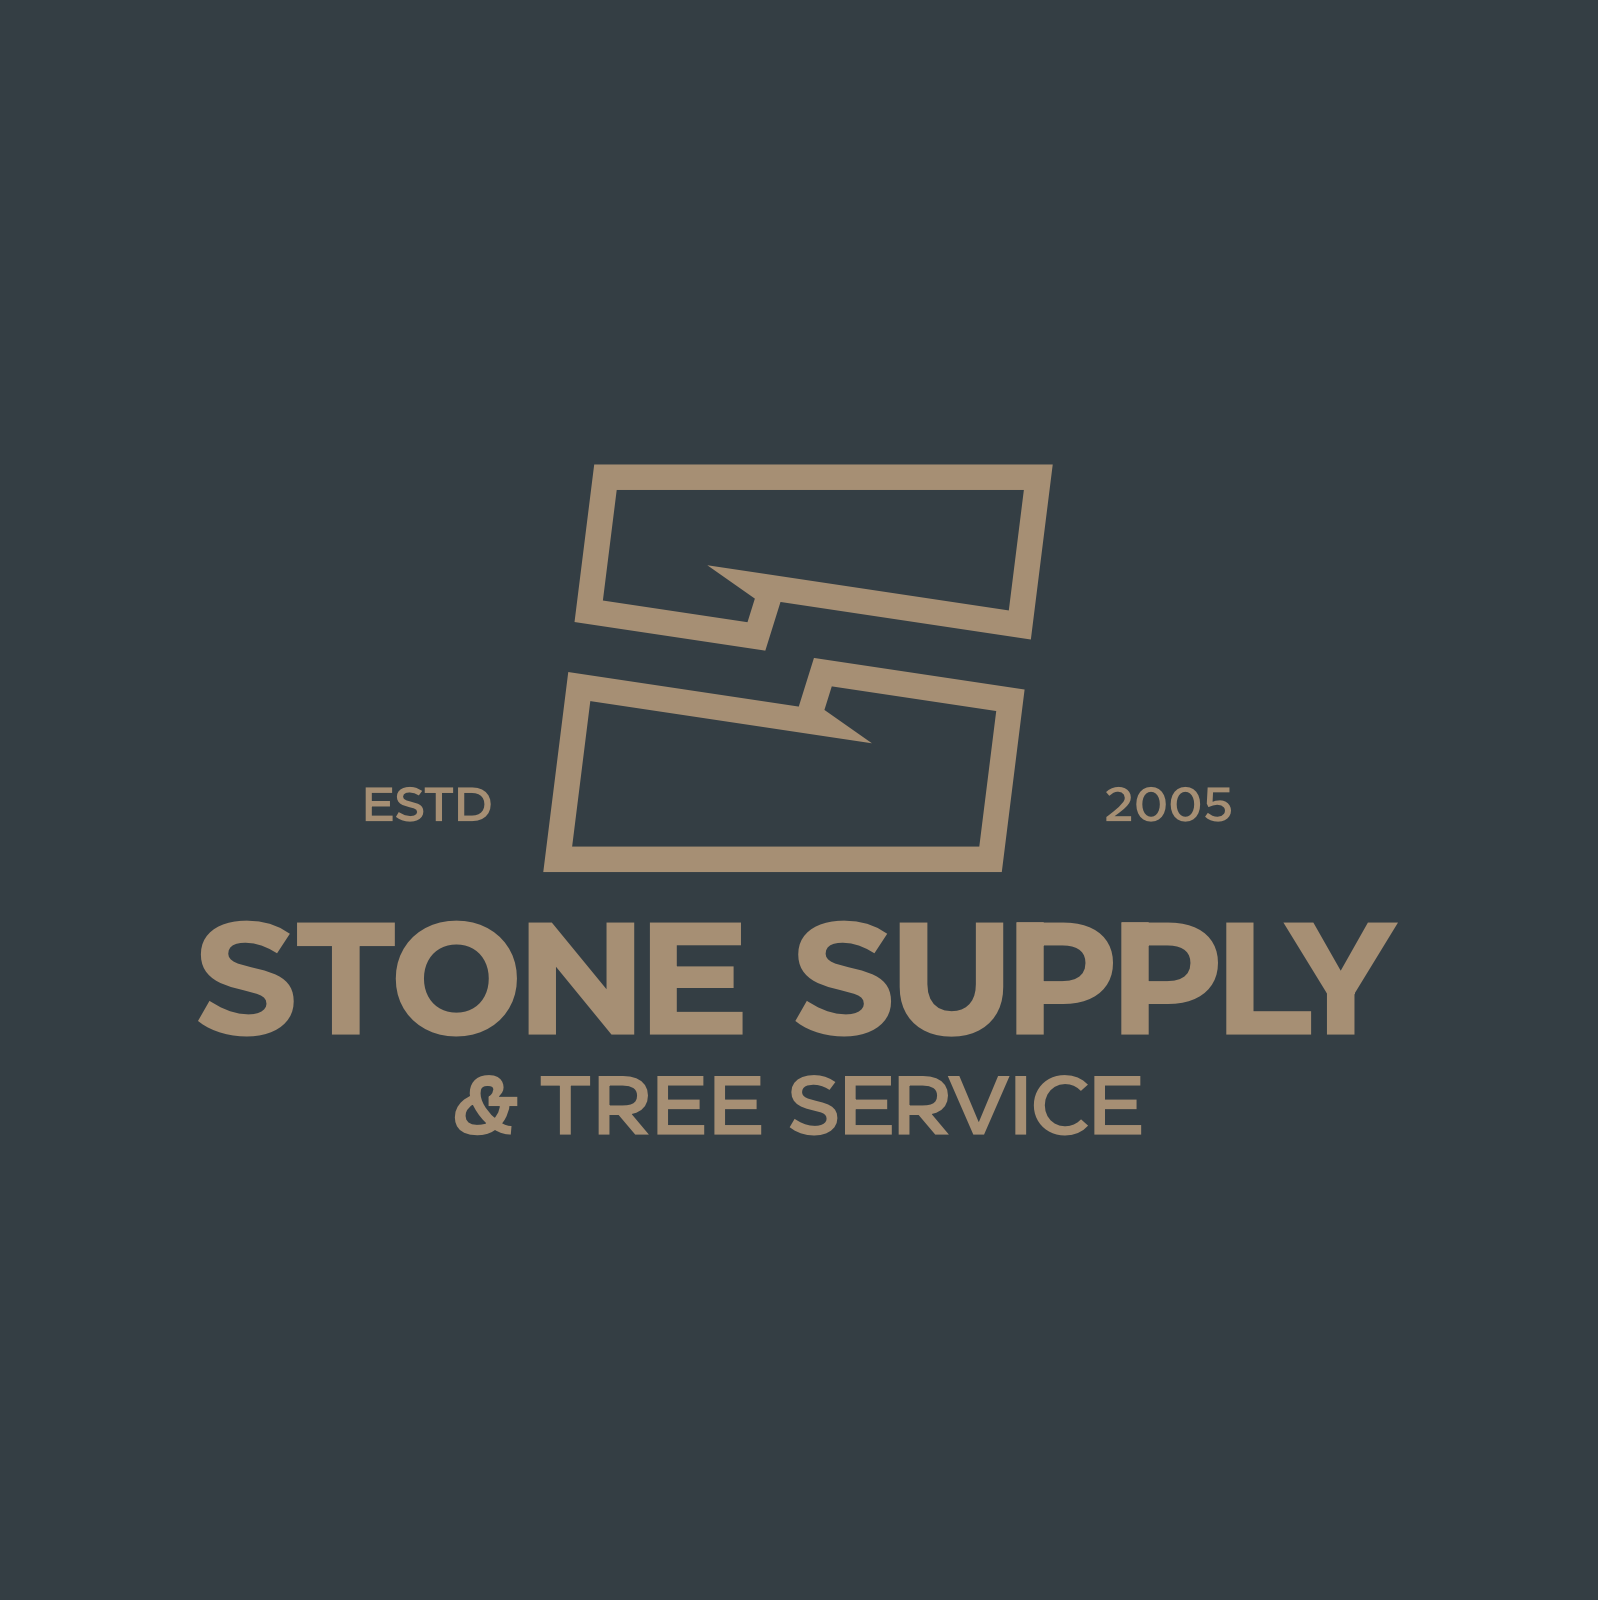 One of the variations of the NJC Stone Supply & Tree Service with logo mark and type logo